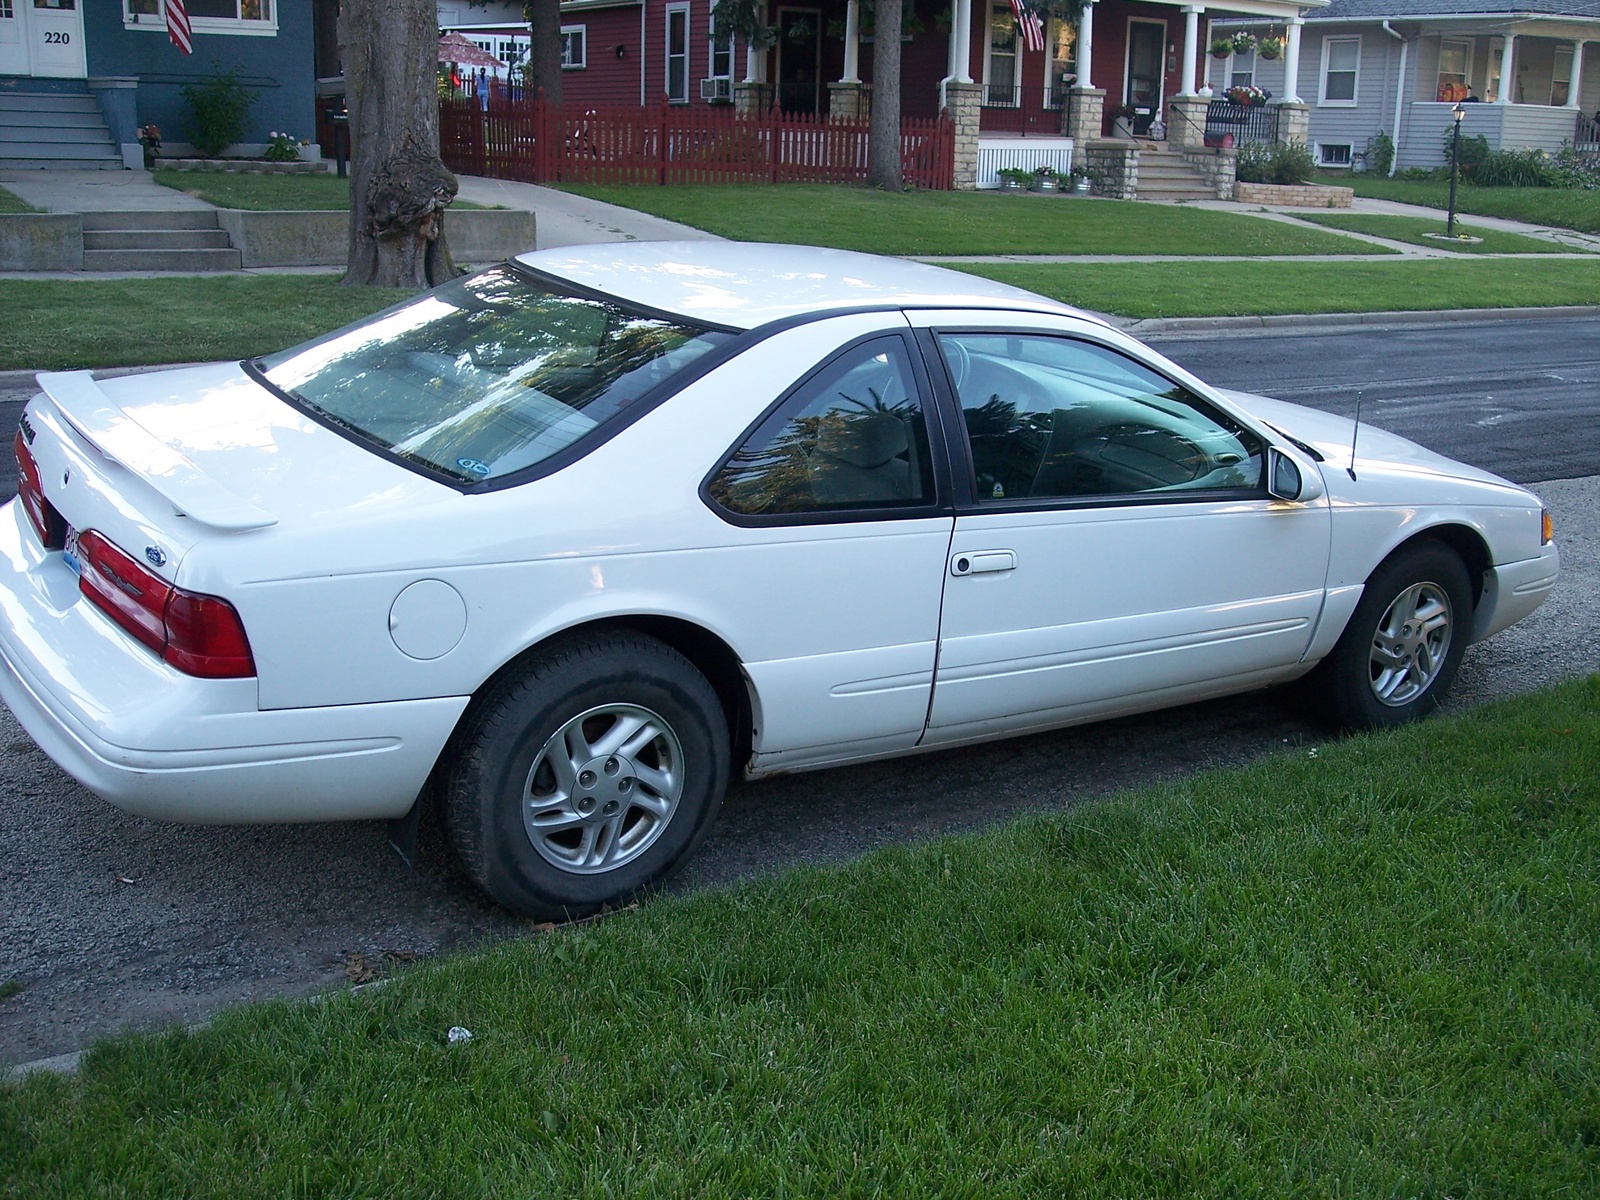 1996 Ford thunderbird lx coupe #2